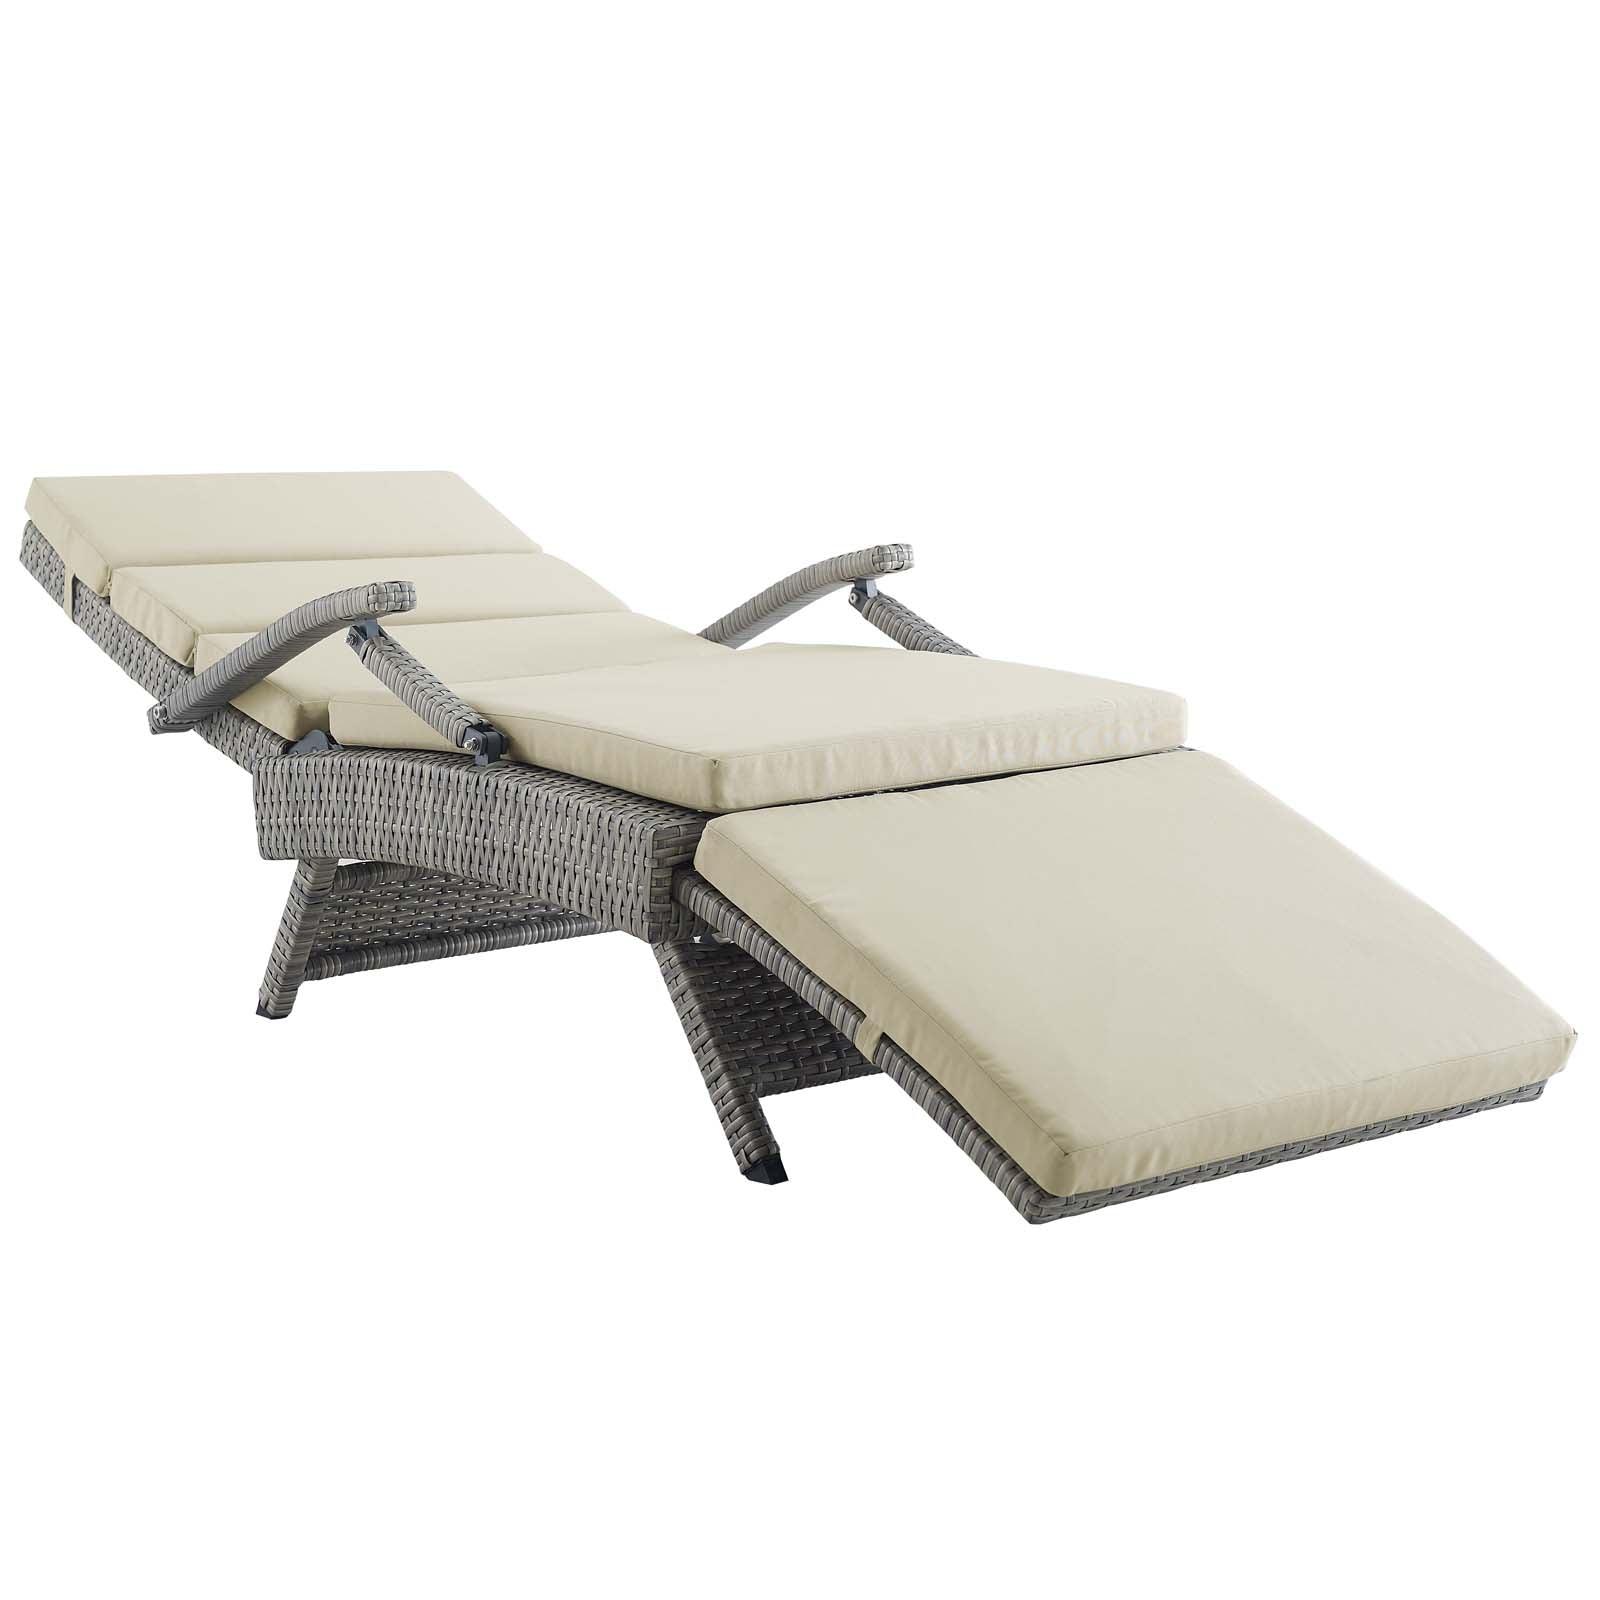 Modway Envisage Chaise Outdoor Patio Wicker Rattan Lounge Chair FredCo